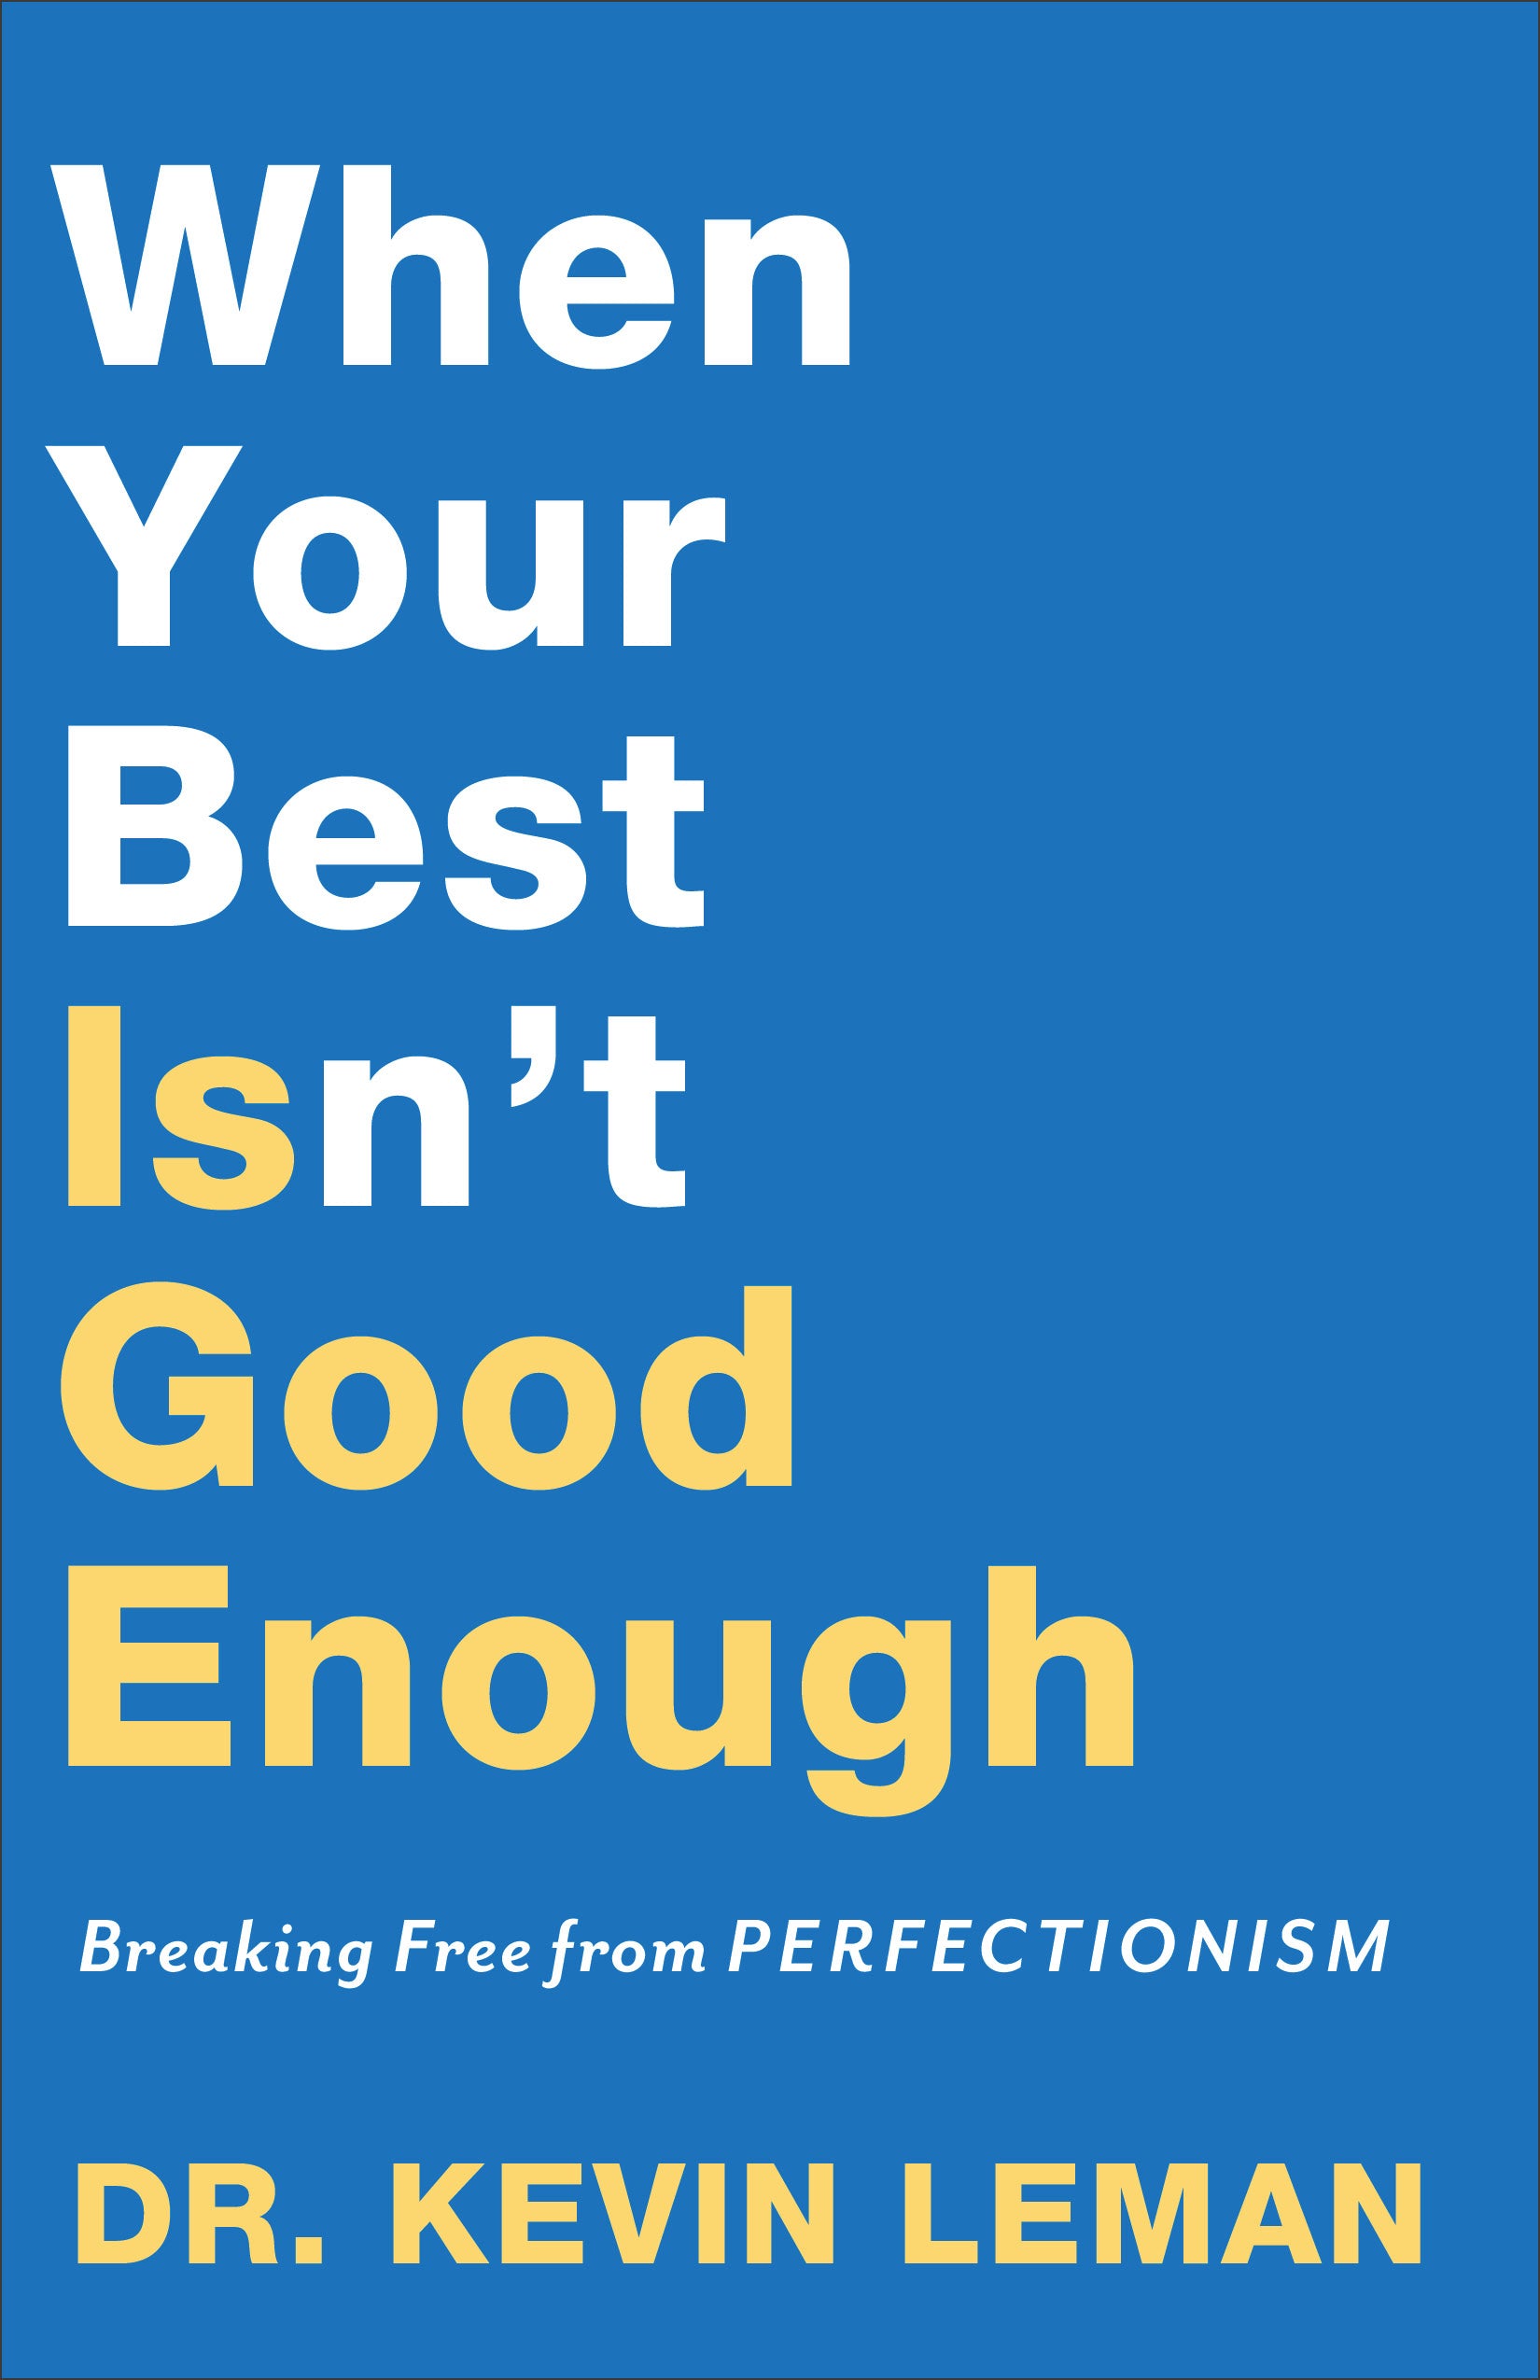 Image of When Your Best Isn't Good Enough other